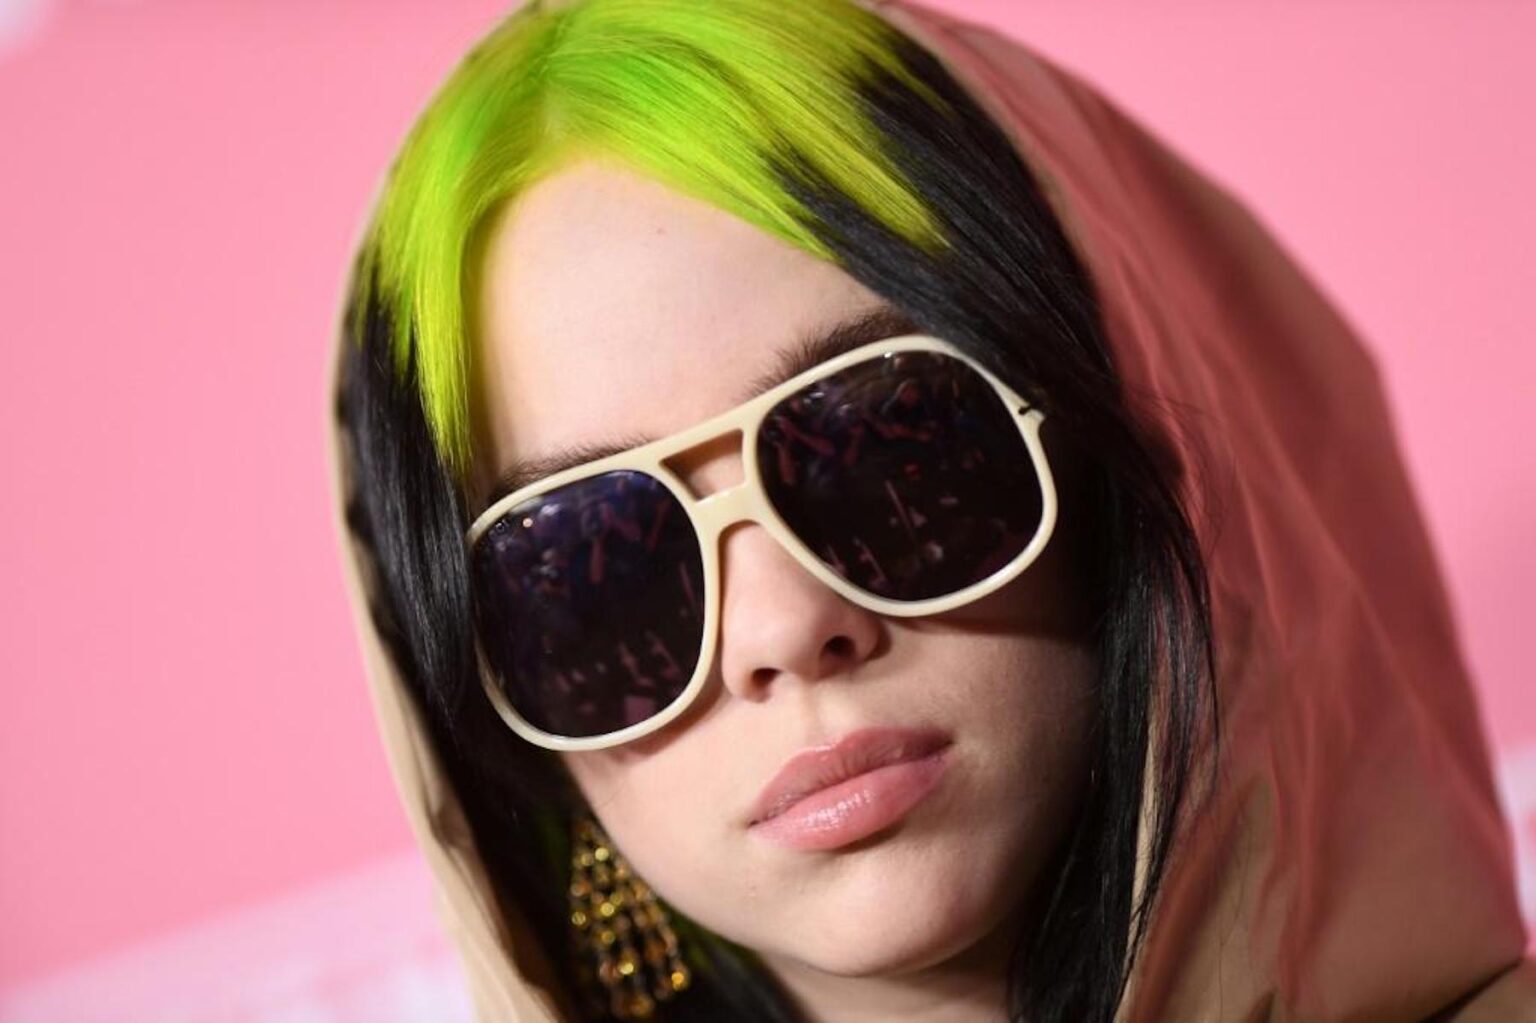 Billie Eilish gets real about her past body struggles and how she feels about the tank top photo. Read on to hear the singer's thoughts.